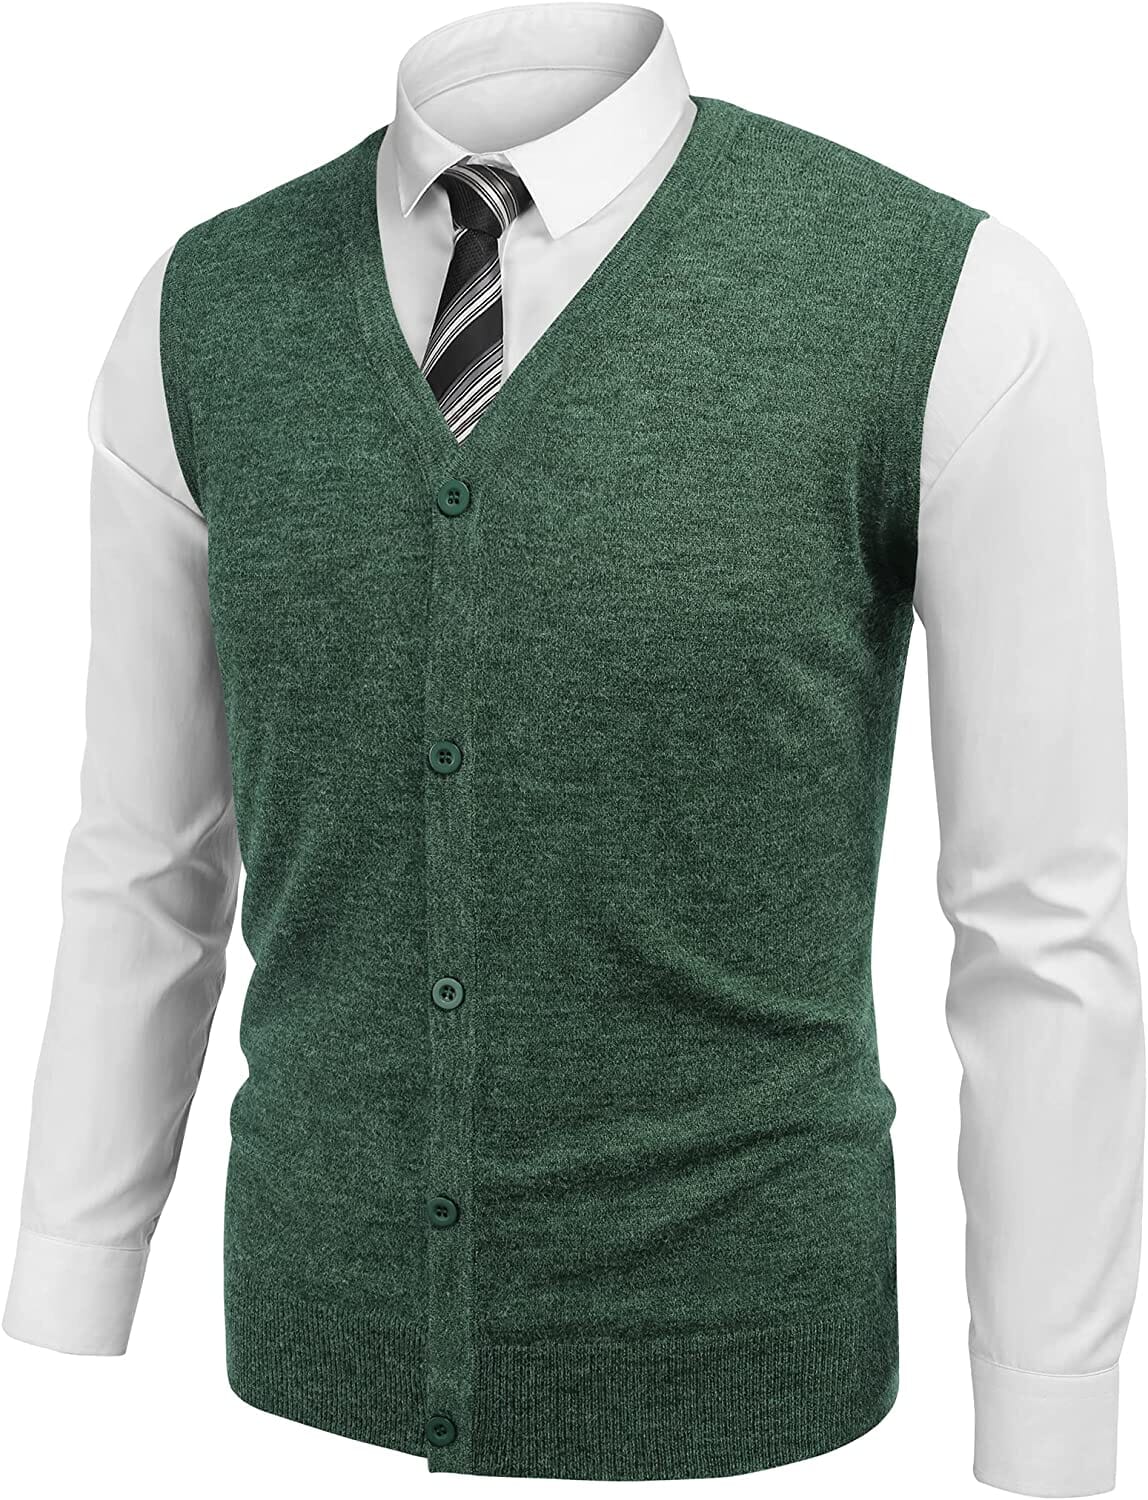 Casual Sleeveless Knitted Button Cardigan Vest (US Only) Vest COOFANDY Store Green S 